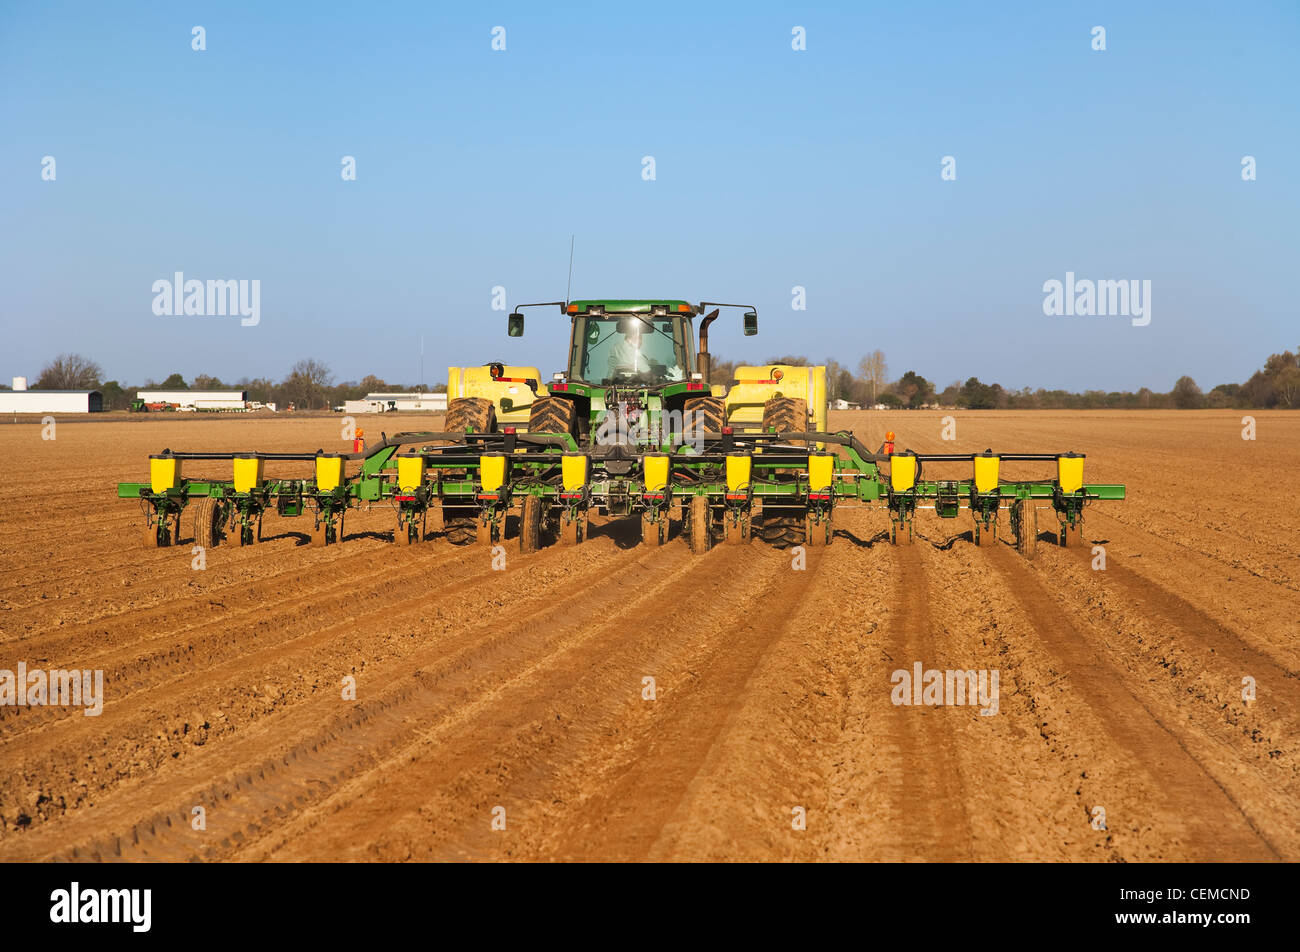 Agriculture - A John Deere tractor and 12-row planter plant grain corn in a conventionally tilled field / Arkansas, USA. Stock Photo